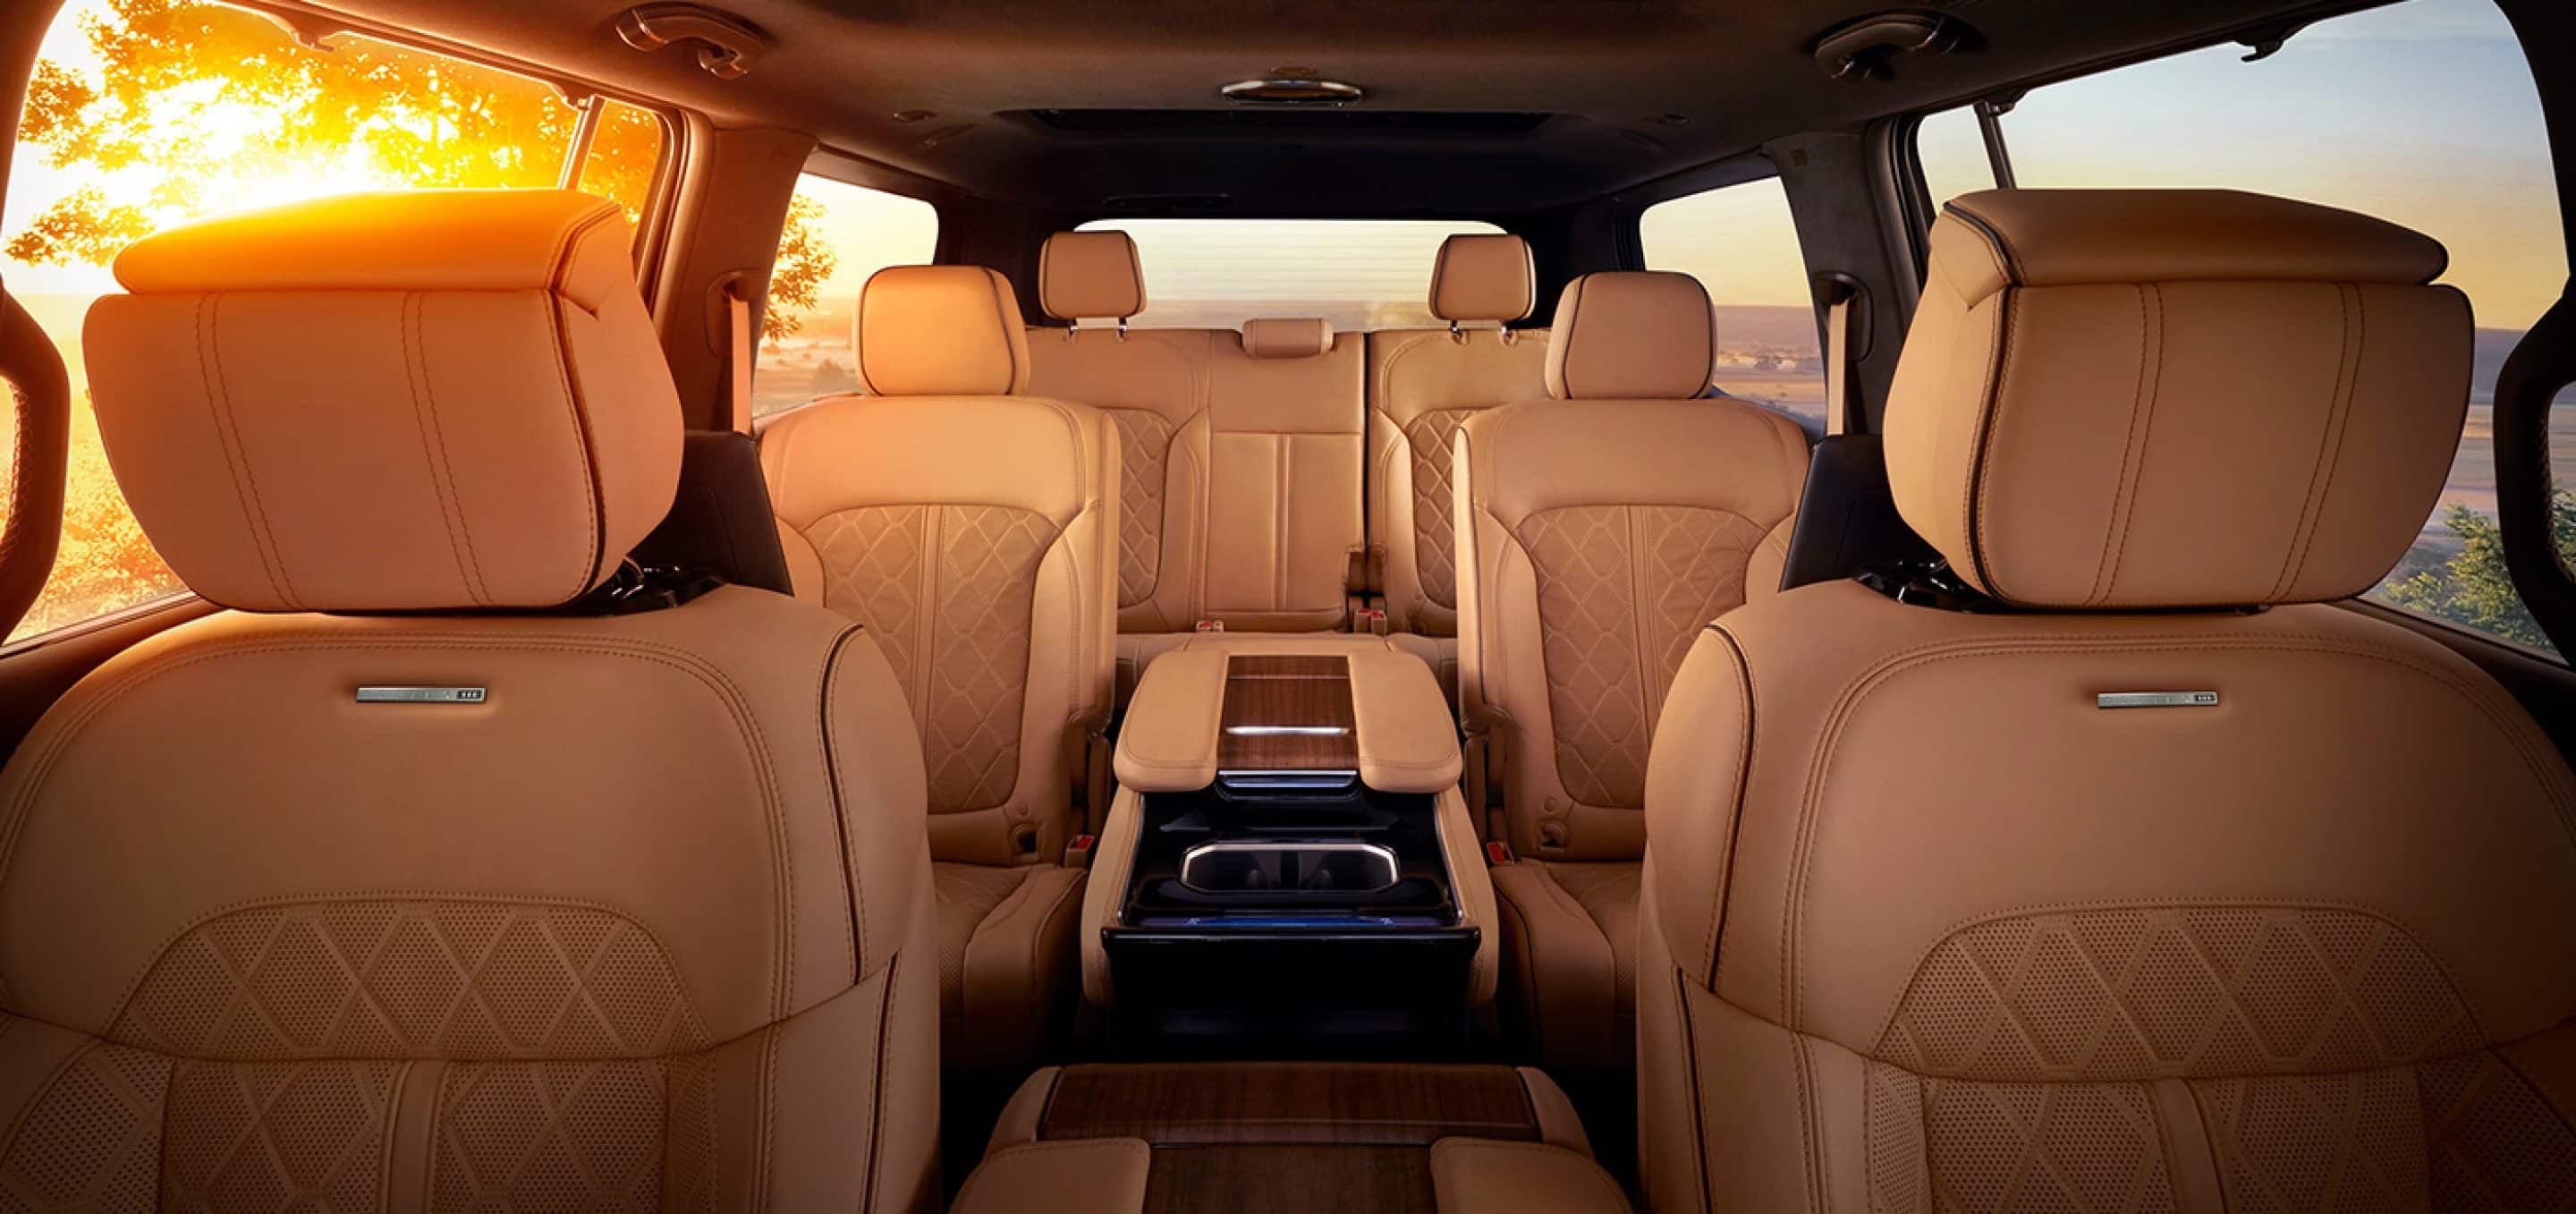 The seats of the 2022 Jeep Grand Wagoneer.